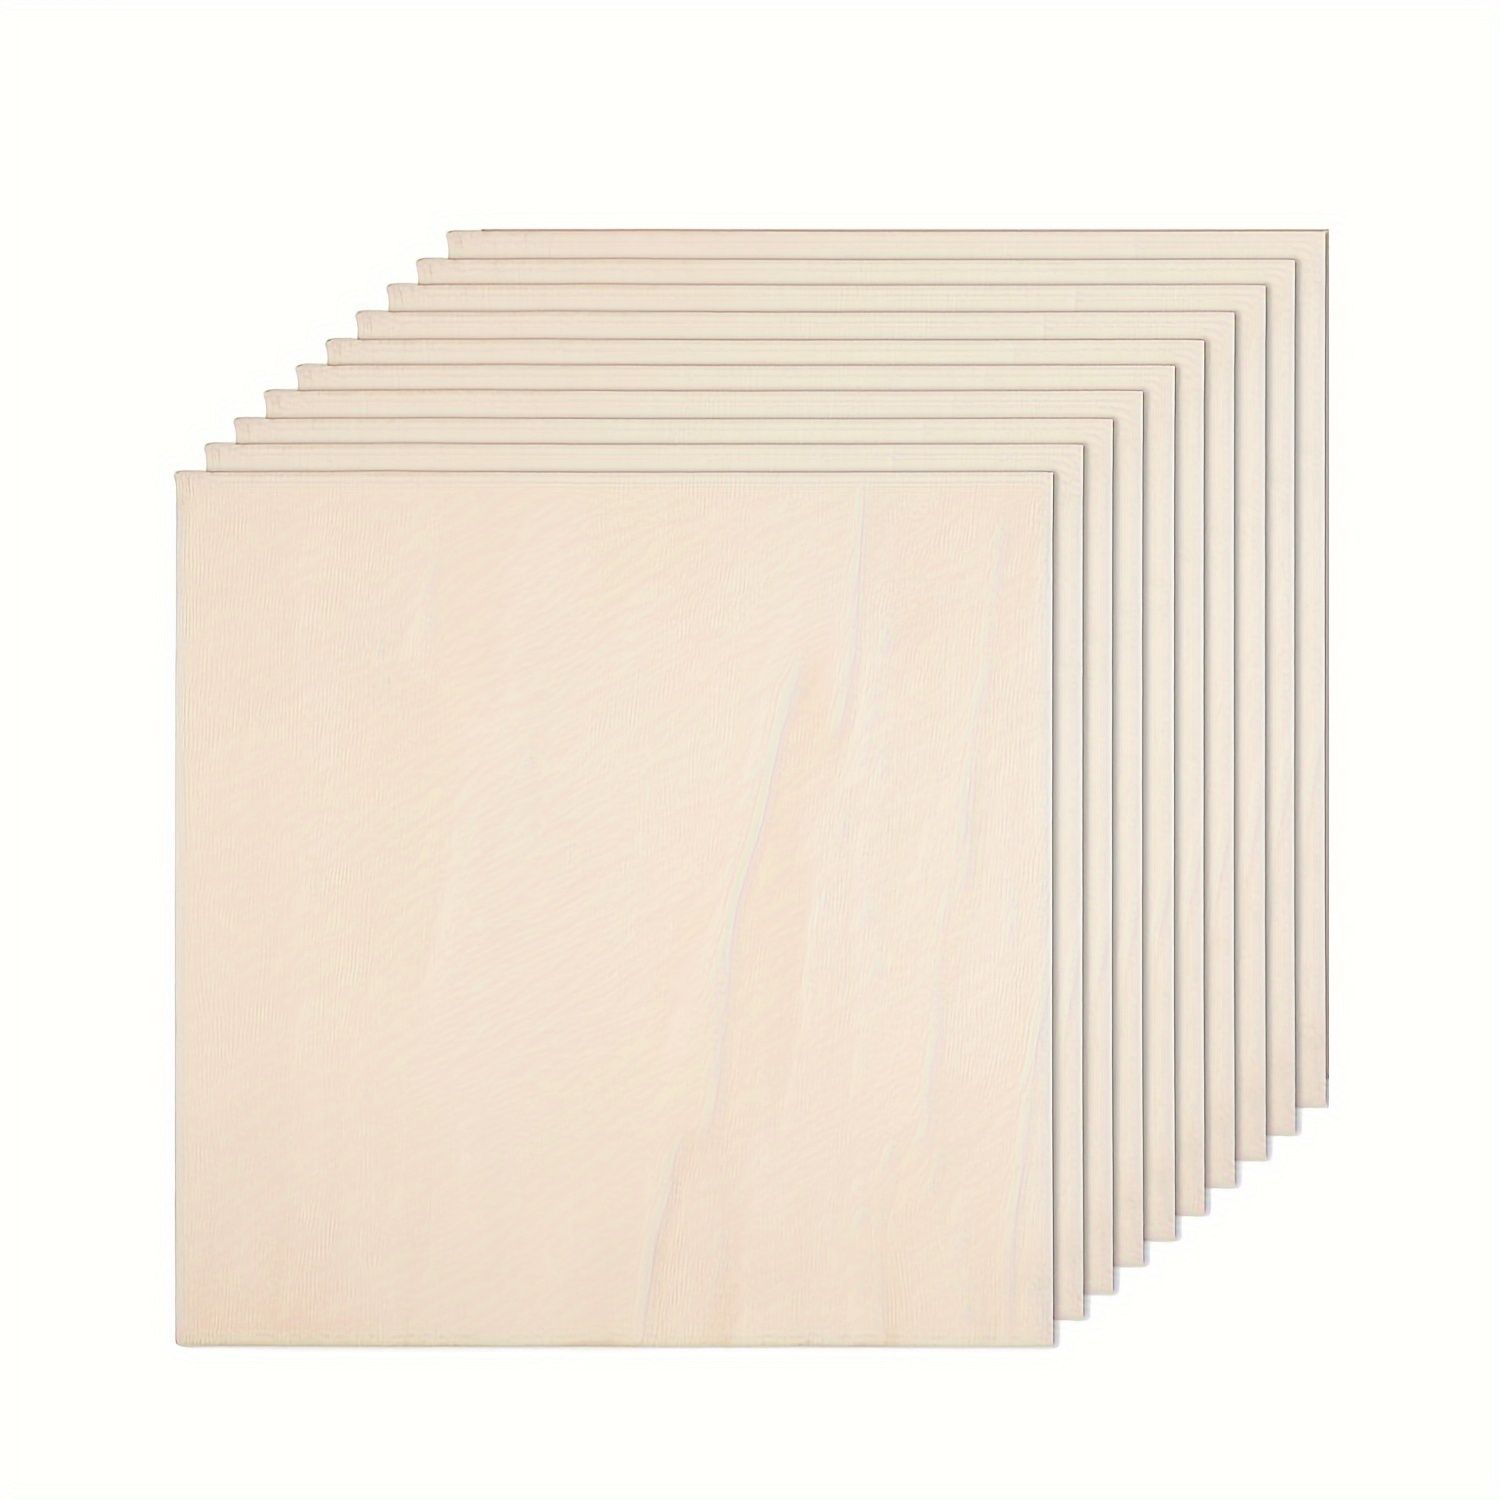 8 Pack 11.8 x 11.8 Inch Basswood Sheets 1/4 Inch Thick Square Plywood  Sheets Unfinished Wood Sheets for Crafts DIY Project Mini House Building